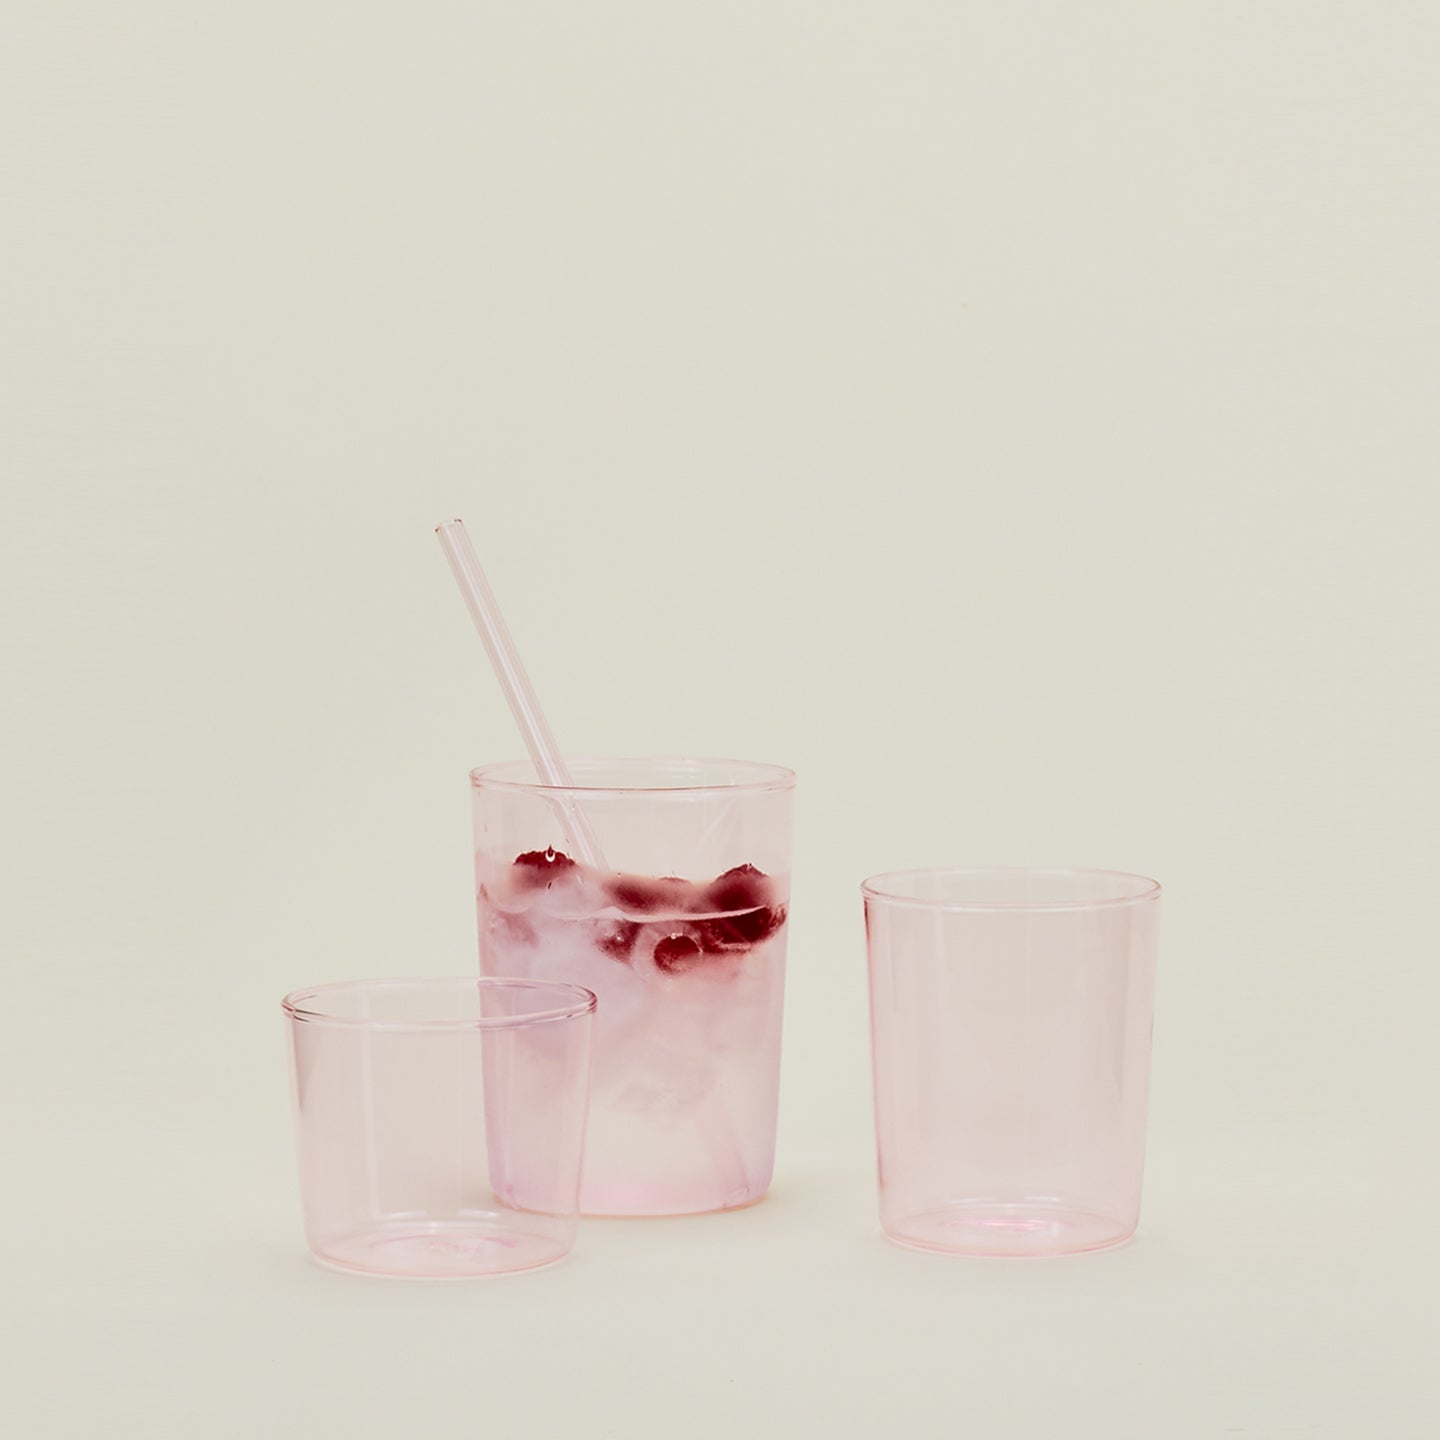 Group of three Essential Glasses in Blush in various sizes, filled with water and fruit with a coordinating glass straw.